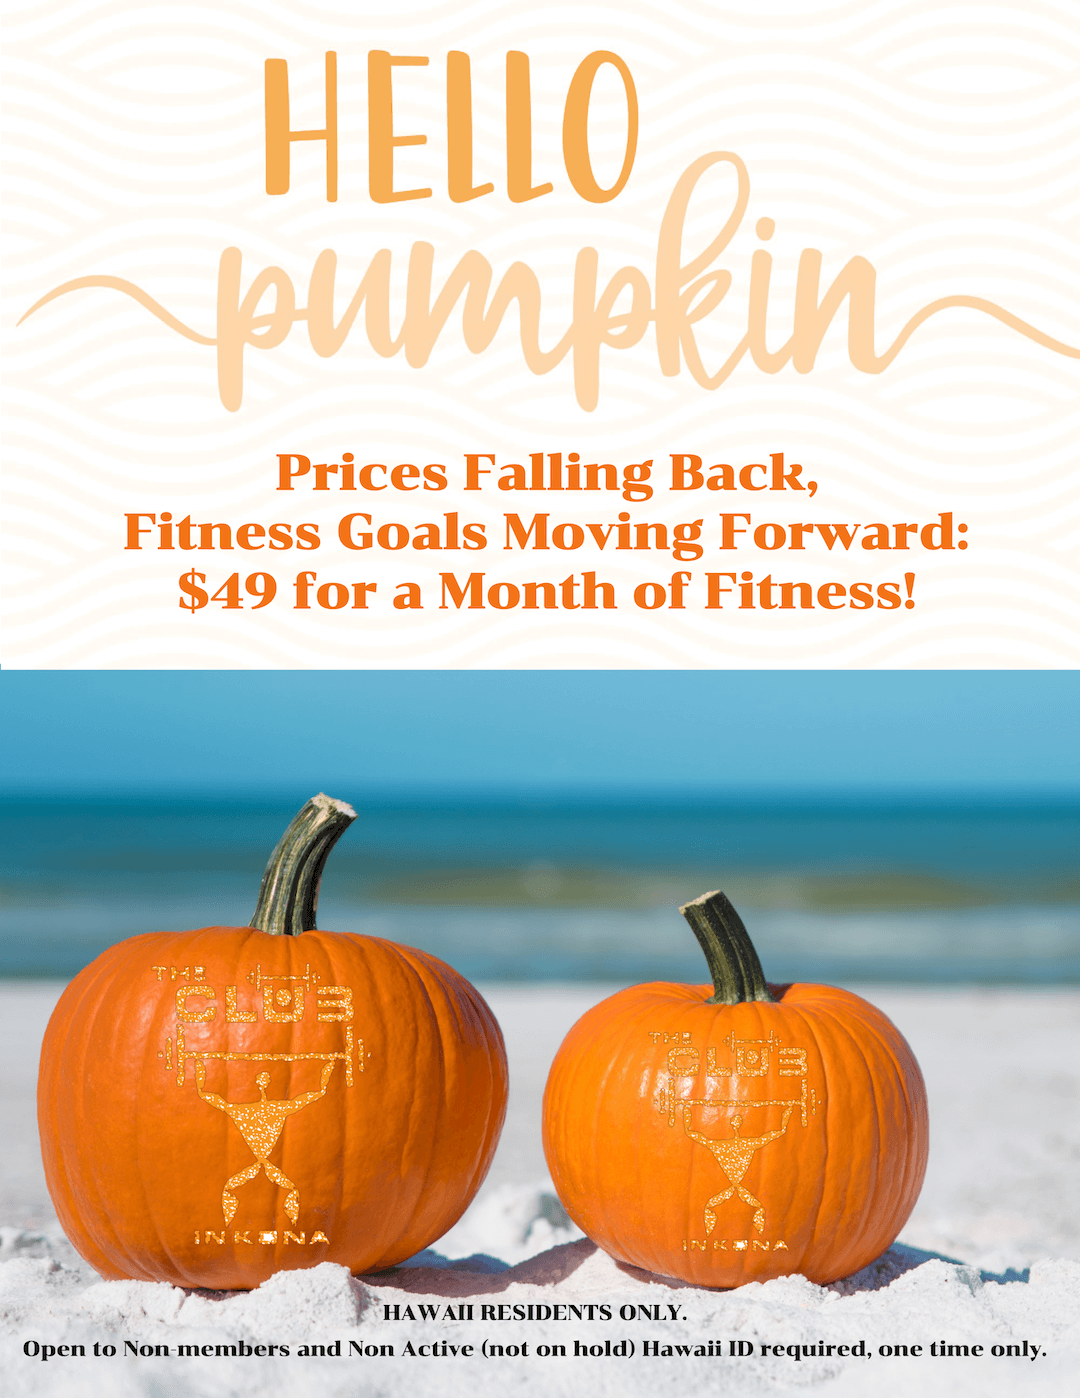 Pumpkins with The Club Kona logos on them, with the text "Hello Pumpkin! Prices Falling Back, Fitness Goals Moving Forward: $49 for a Month of Fitness! Hawaii Residents Only. Open to Non-Members and Non-Active (not on hold). Hawaii ID required, one time only."